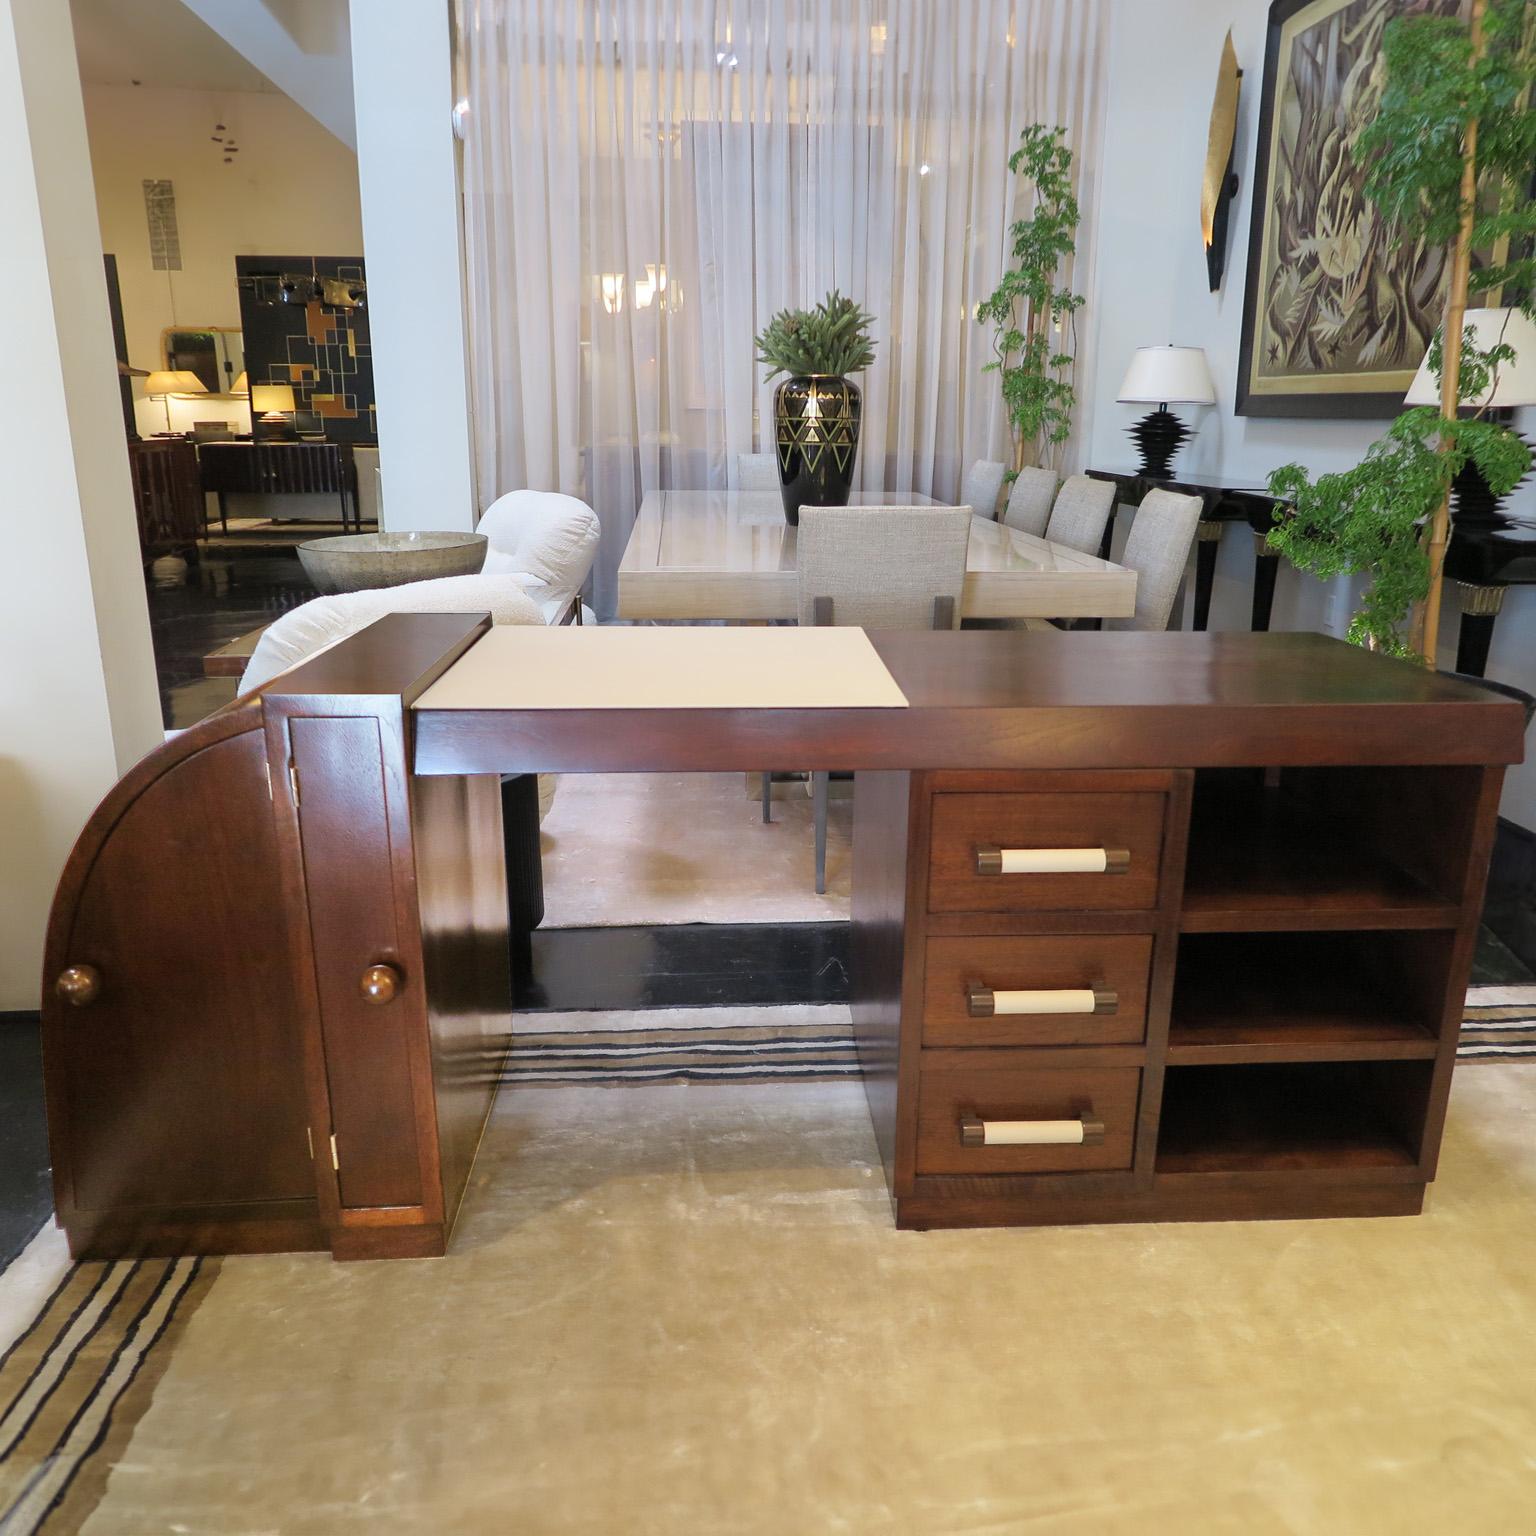 Mid-Century desk in walnut with an open pore satin finish. The asymmetrical design offers a statement in any room. One side curves down with two compartment doors. The rectangular side features a long desk top with 3 drawers and 3 open compartments.